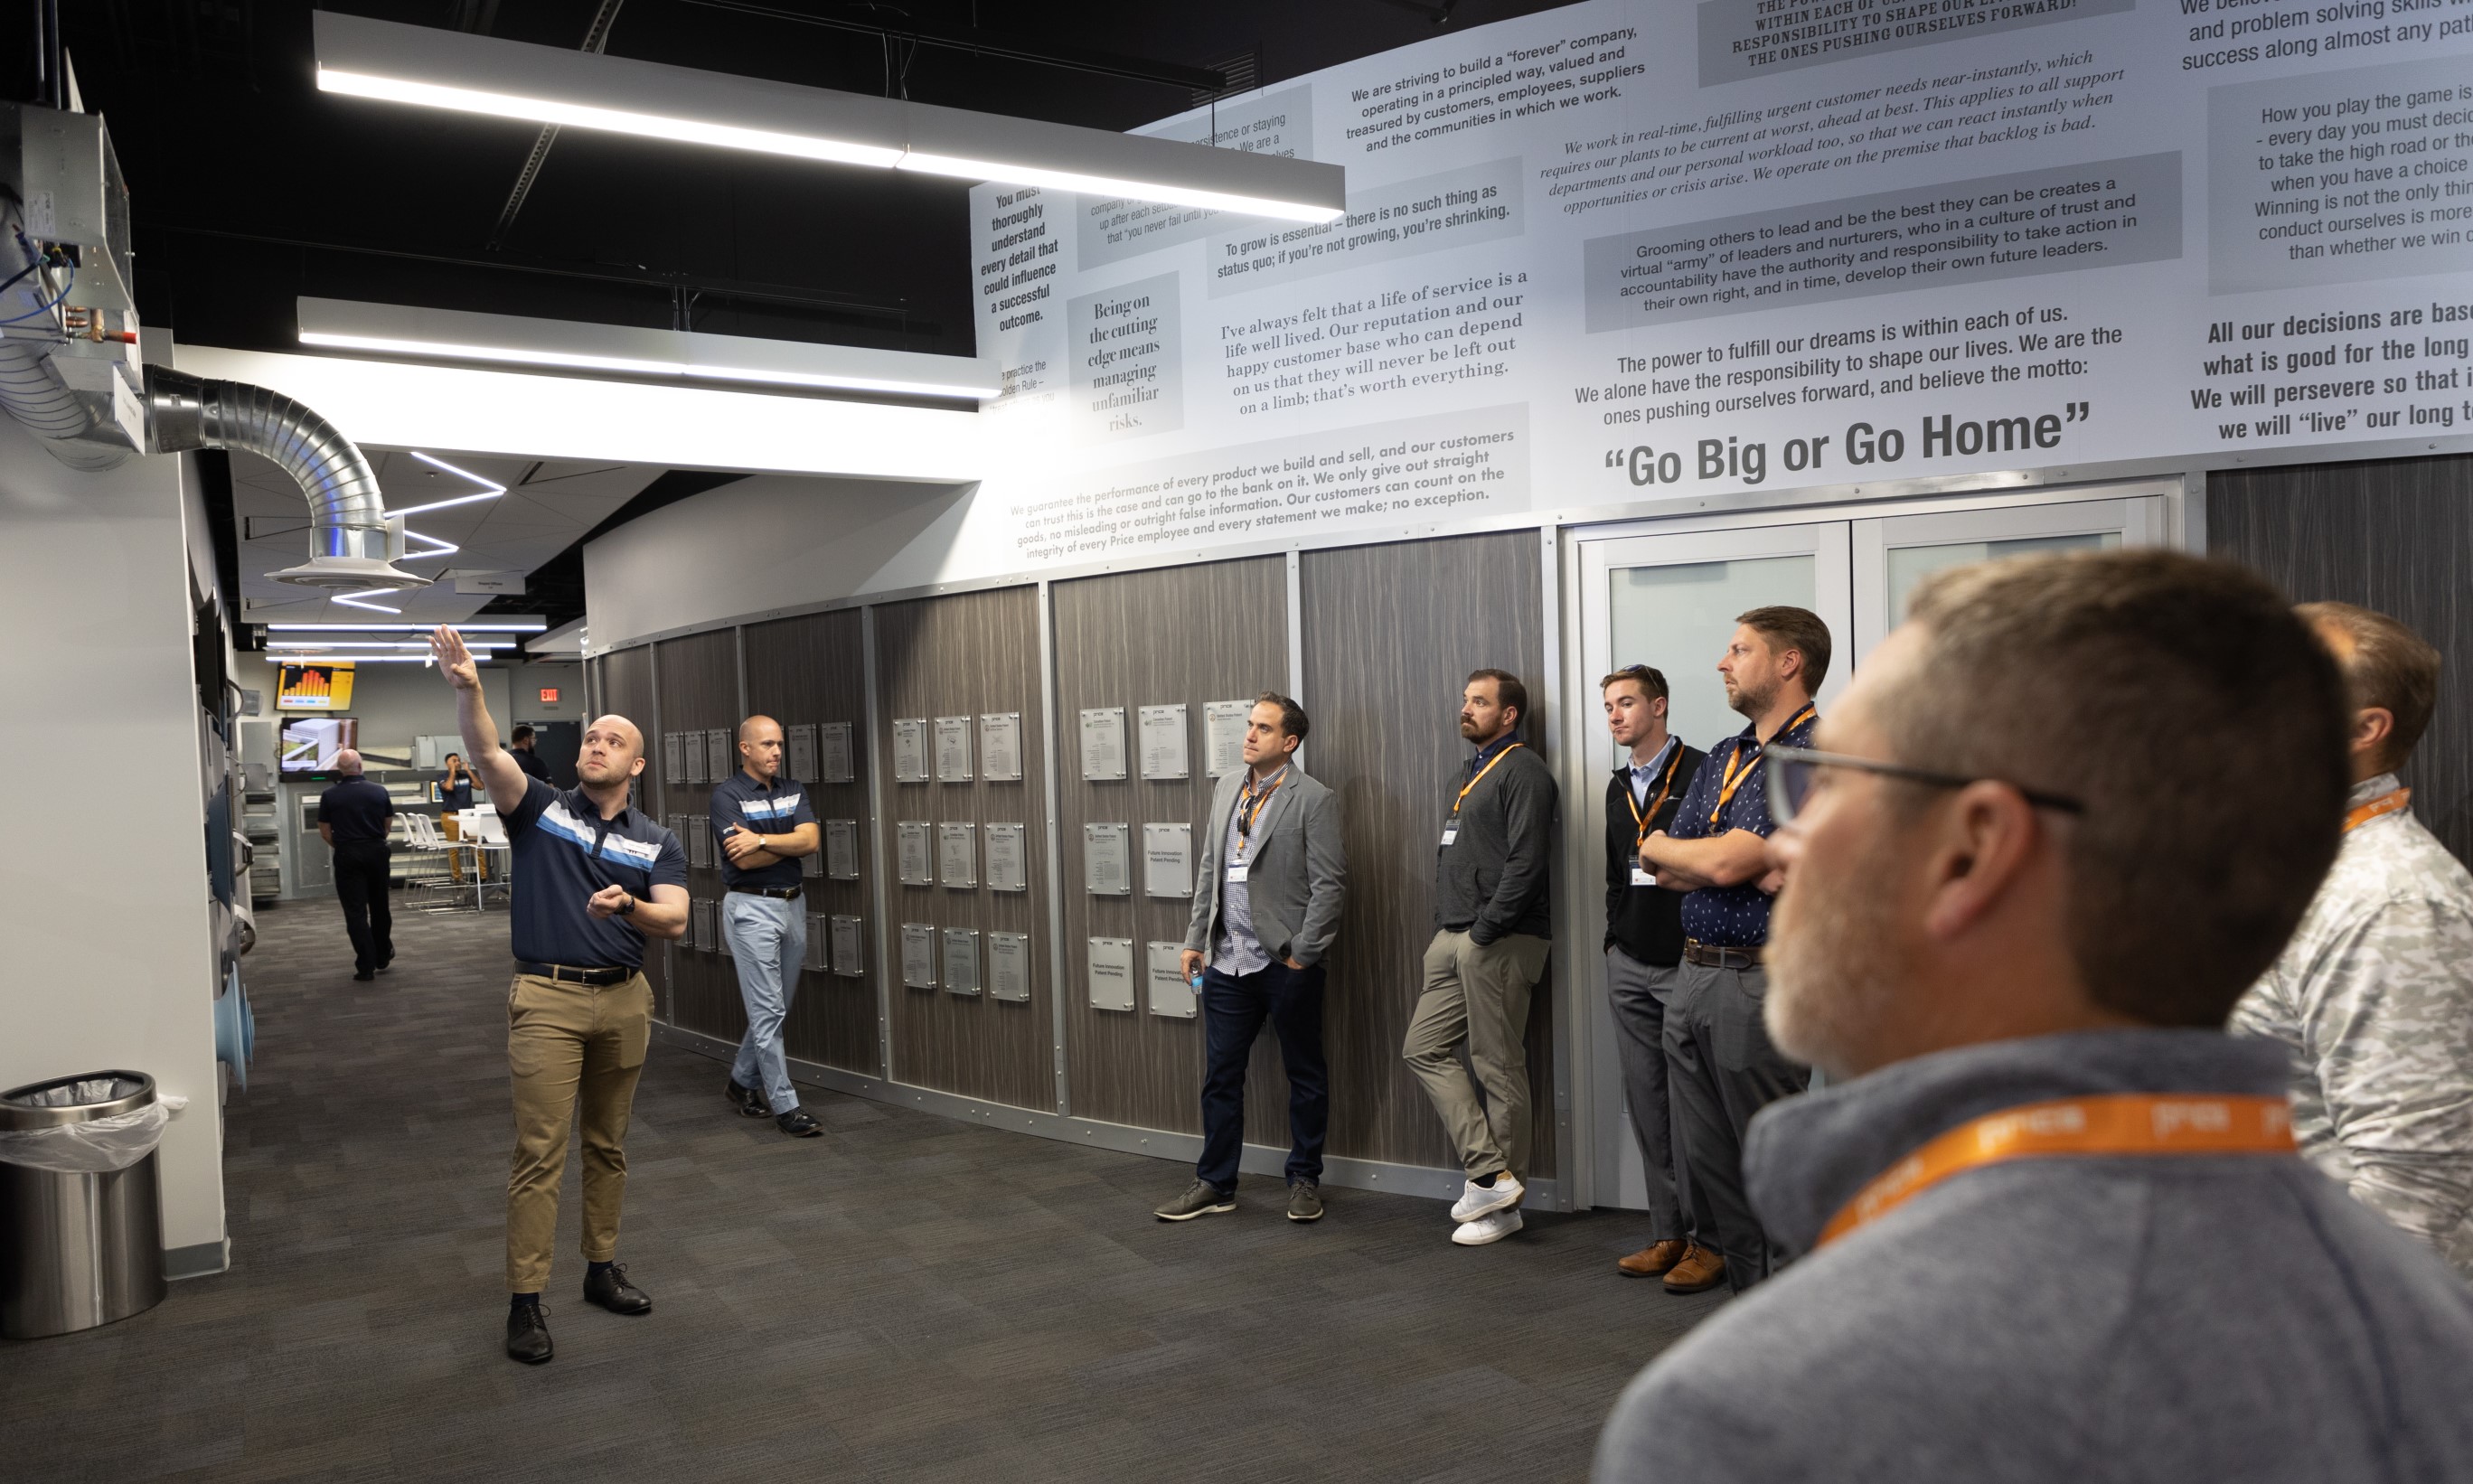 Ryan Johnson explains the Systems Wall to visitors